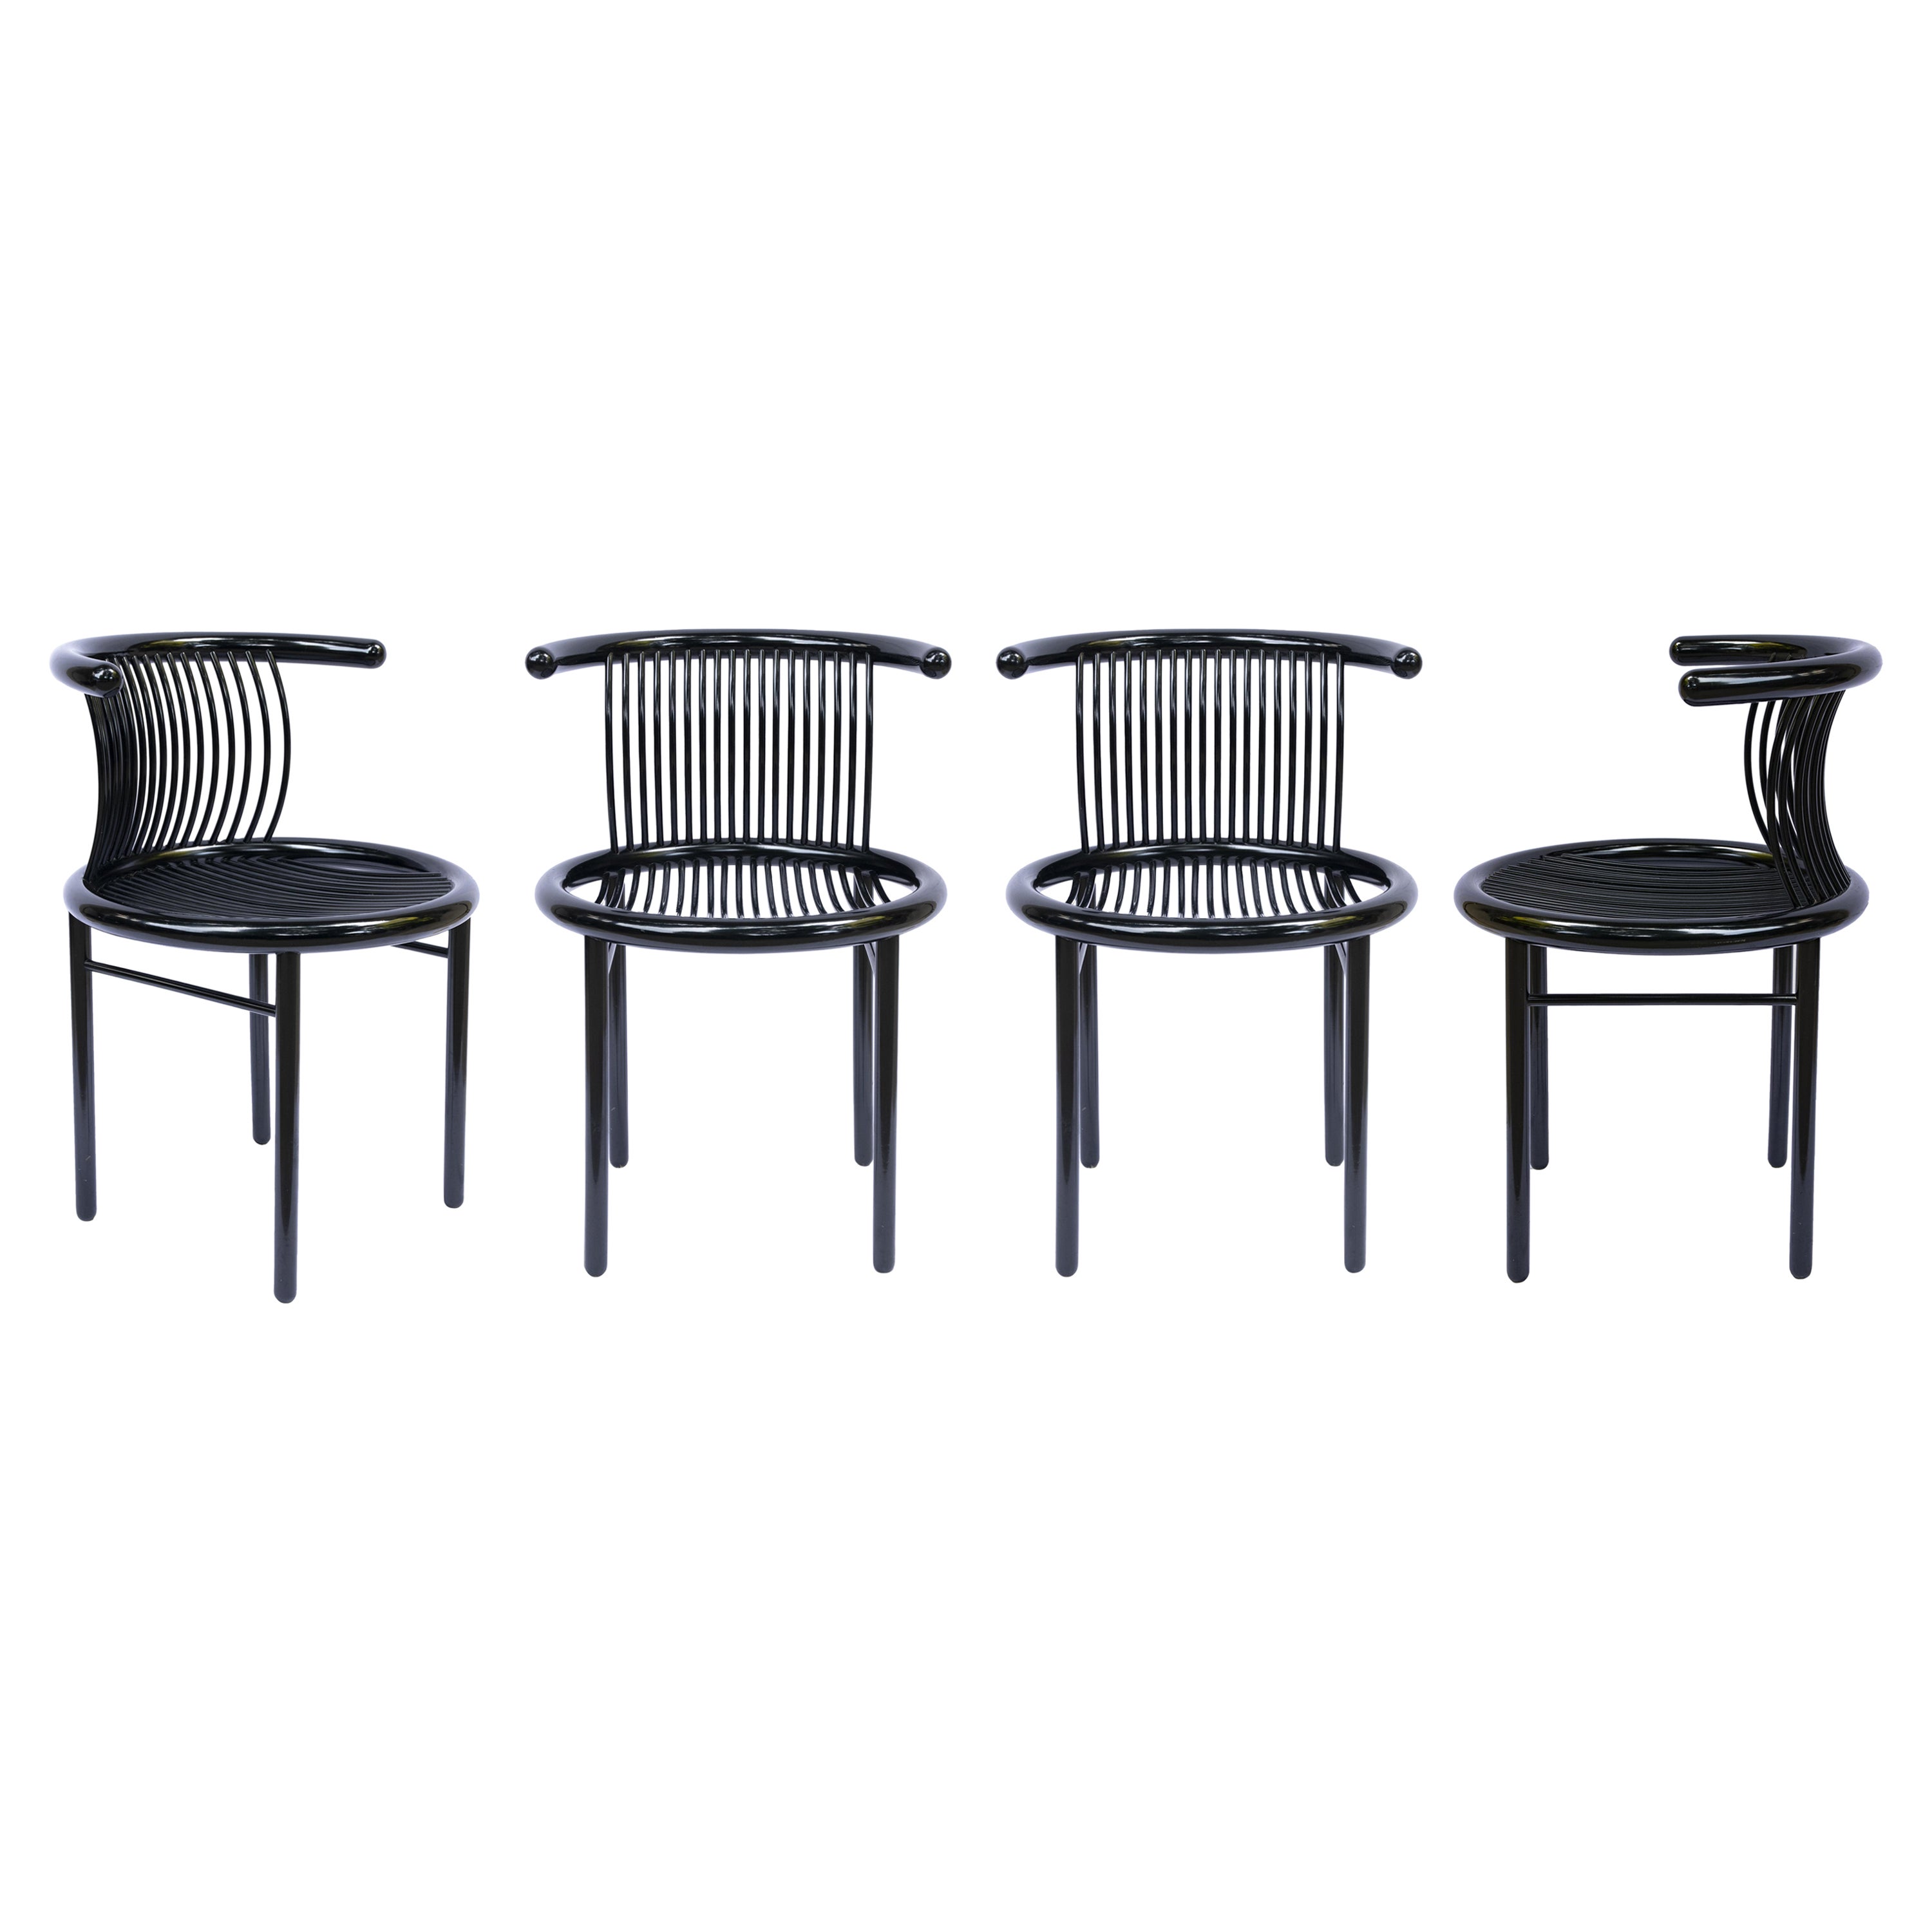 Set of 4 Vintage Chairs Circo Jutta & Herbert Ohl for Lübke, Germany 1980s For Sale